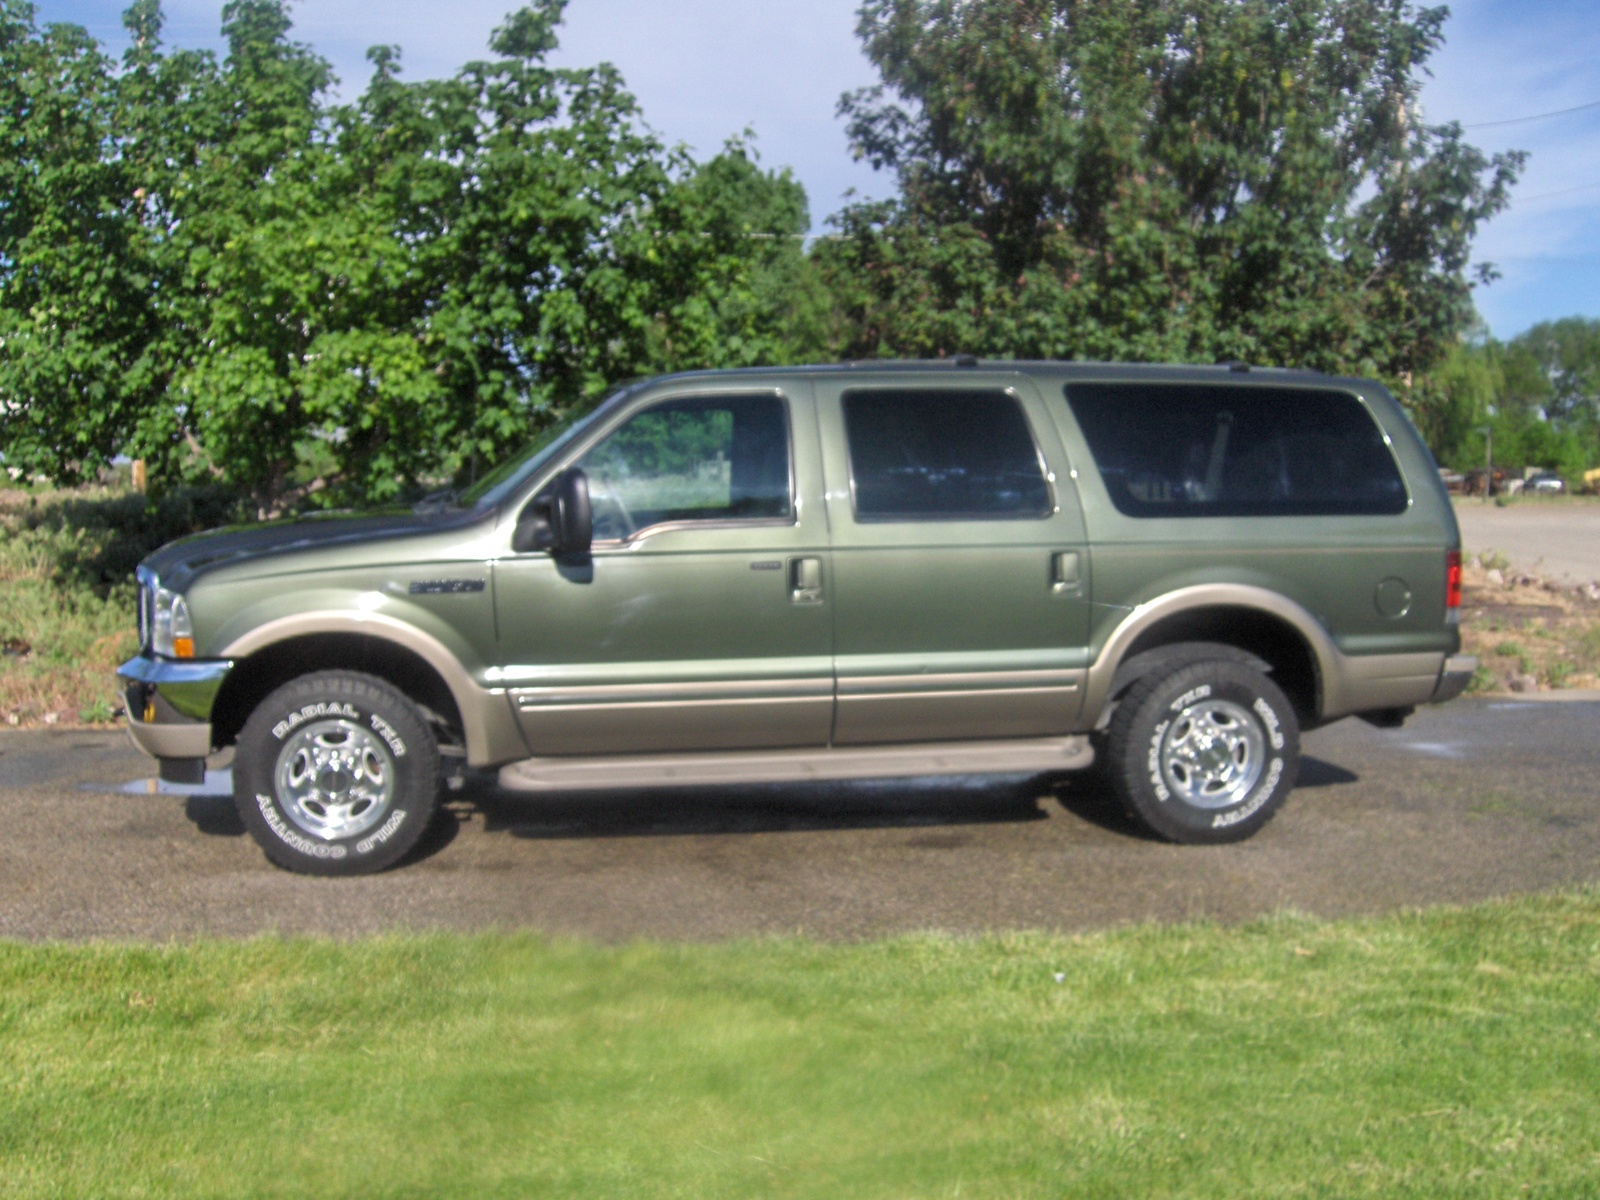 Used ford excursion for sale yahoo.autos #6